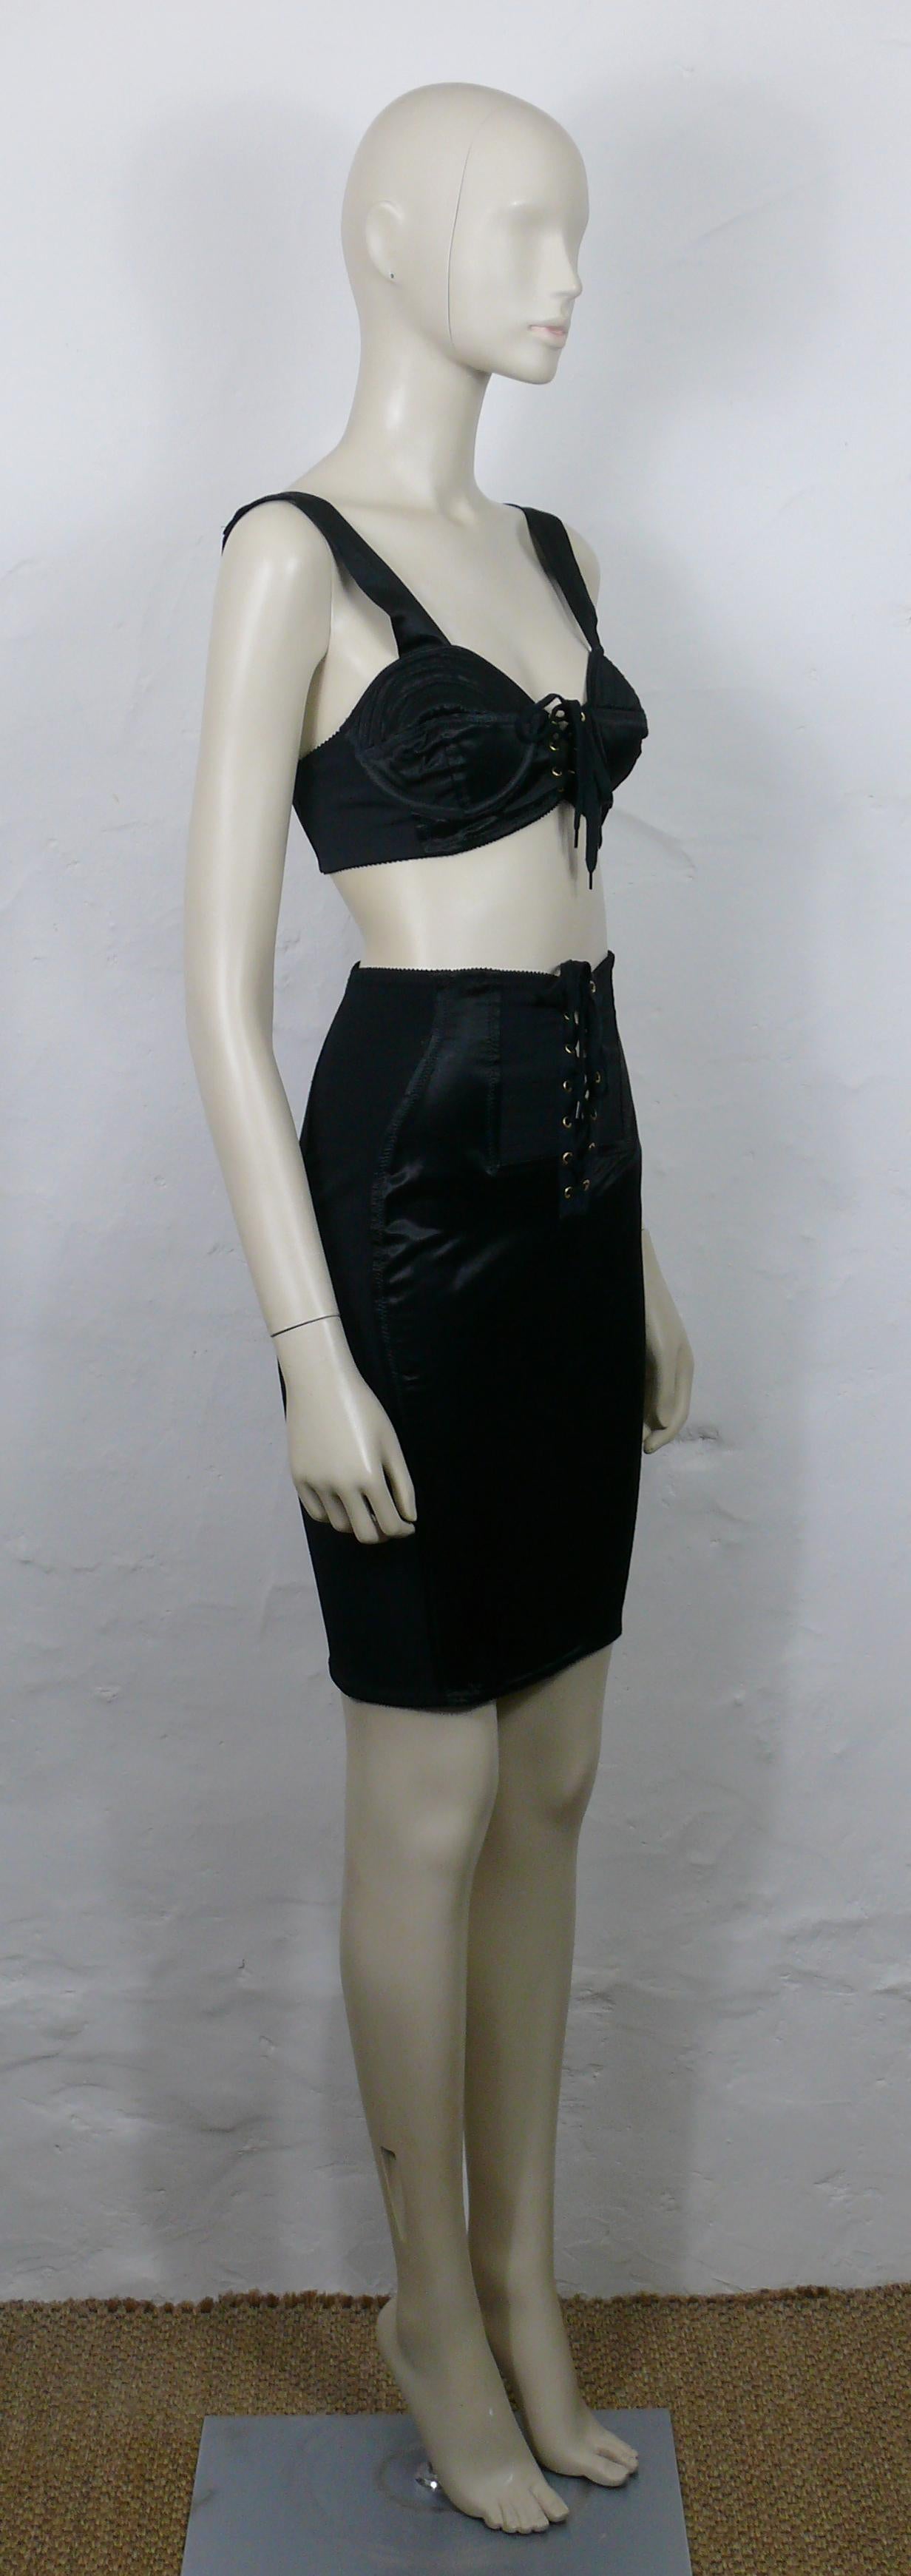 JEAN PAUL GAULTIER JUNIOR vintage rare black cone bra and skirt ensemble.

The BRA features :
- Black satin-like lustre fabric.
- Half cone design on the breast.
- Nylon panels at the sides and back.
- Laced front, gold tone hardware eyelets.
-